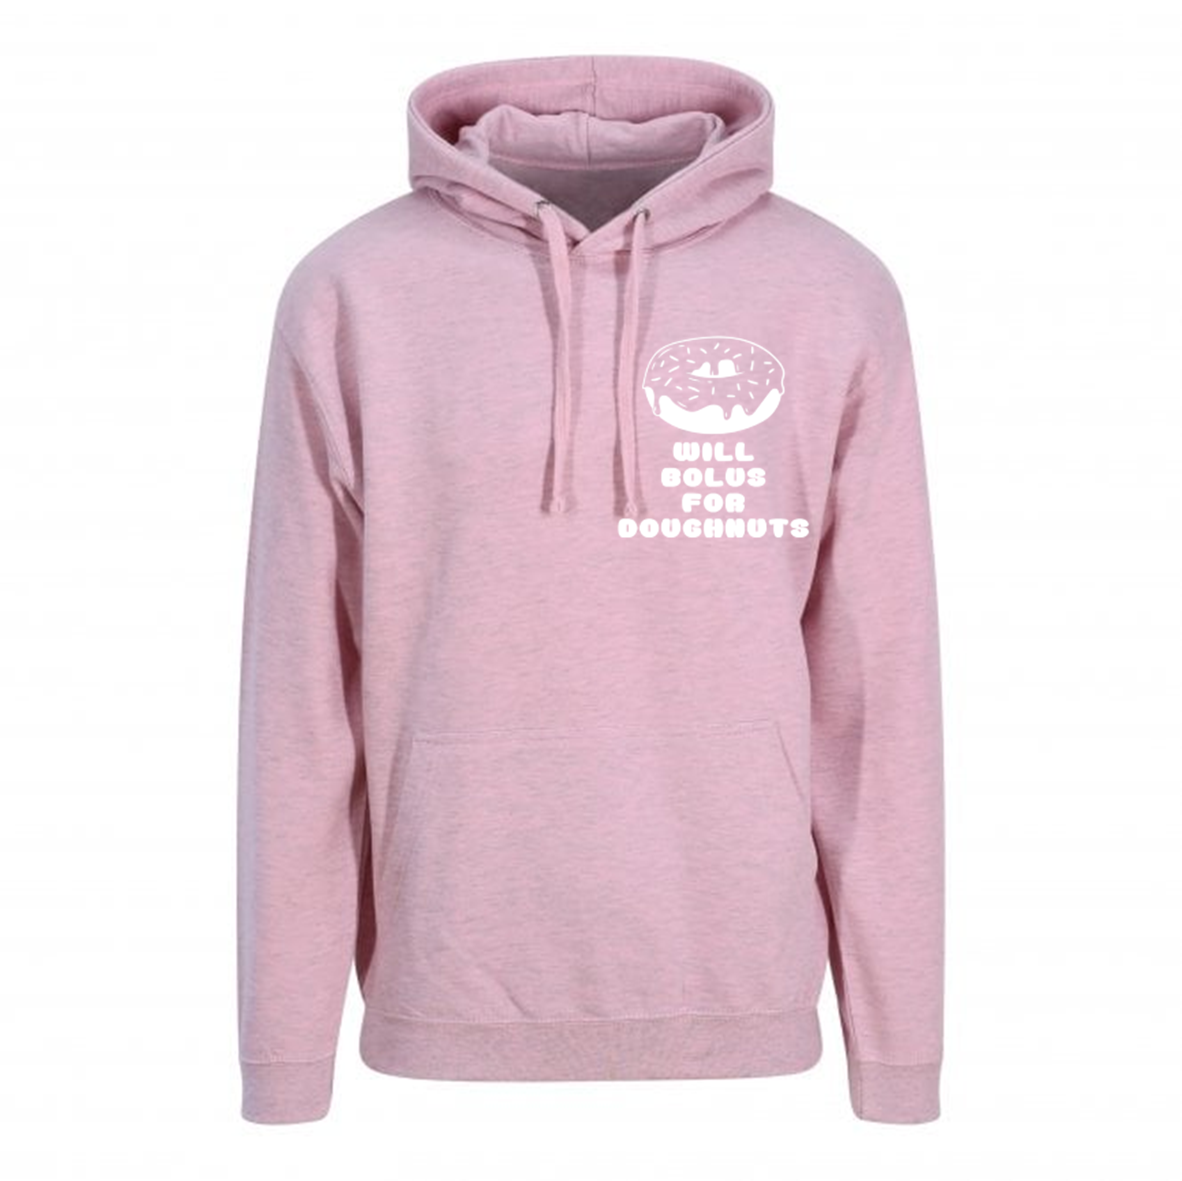 Will Bolus For Doughnuts Pastel Hoodie